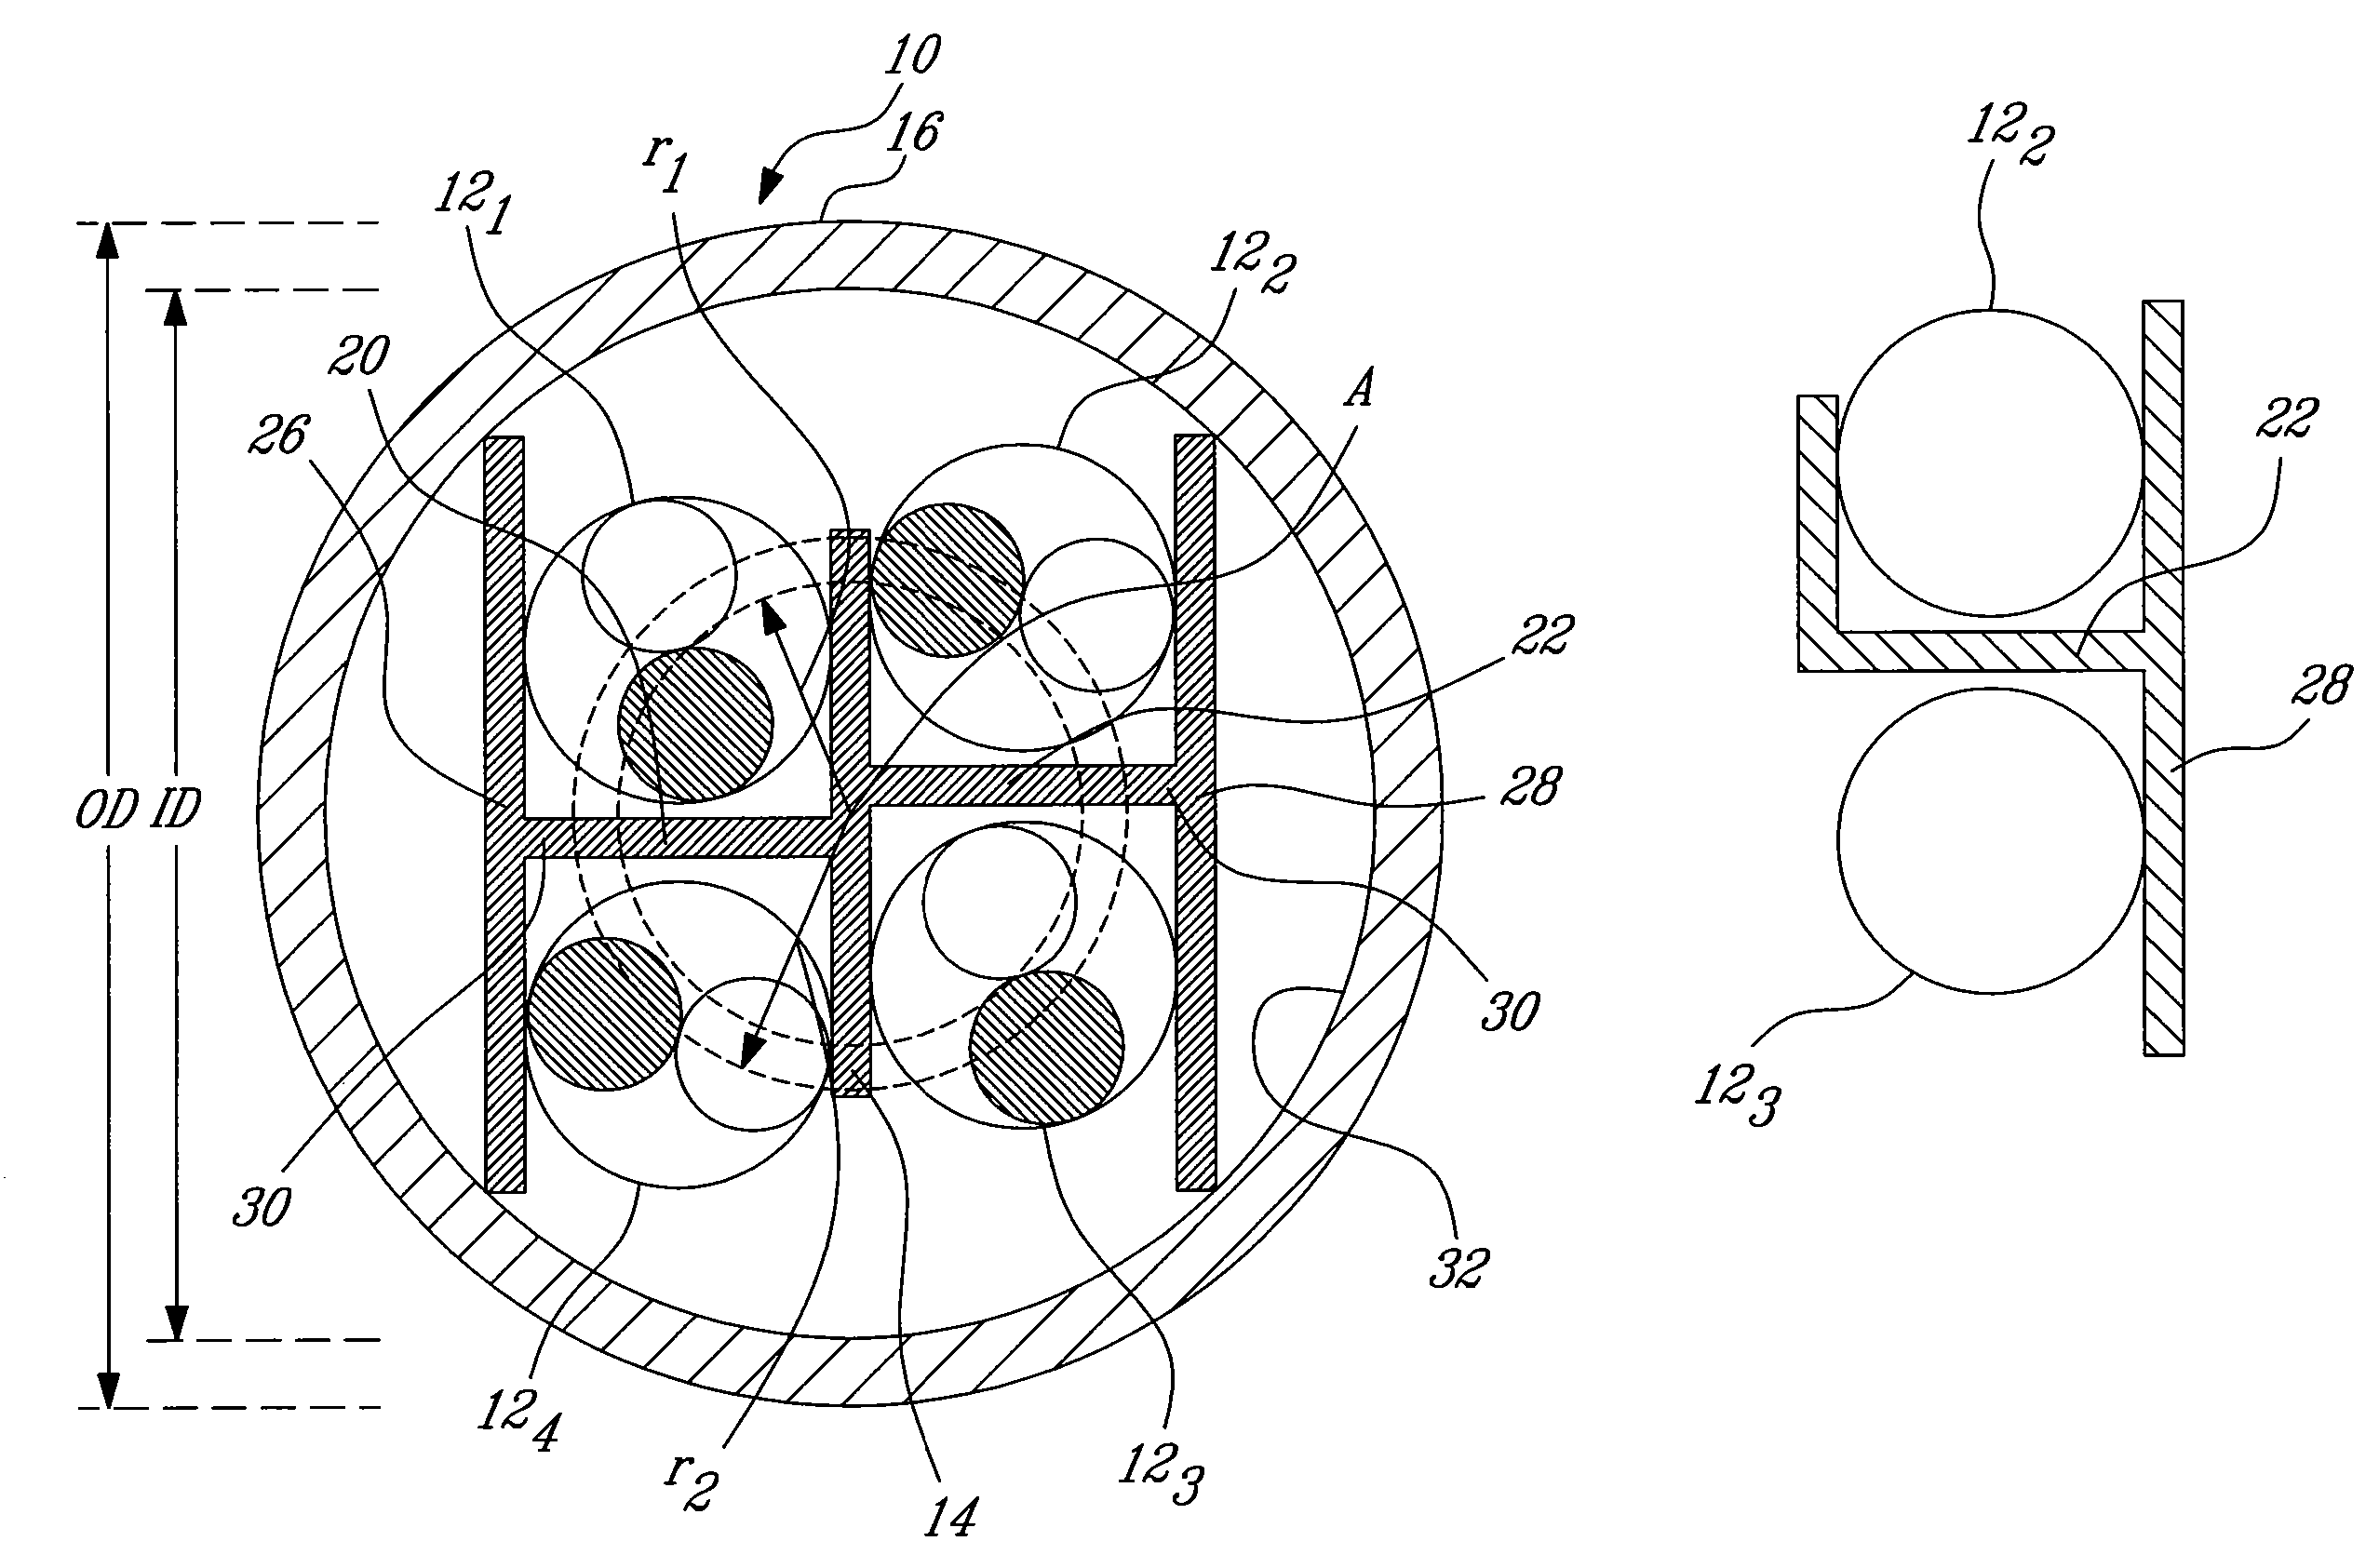 Web for Separating Conductors in a Communication Cable